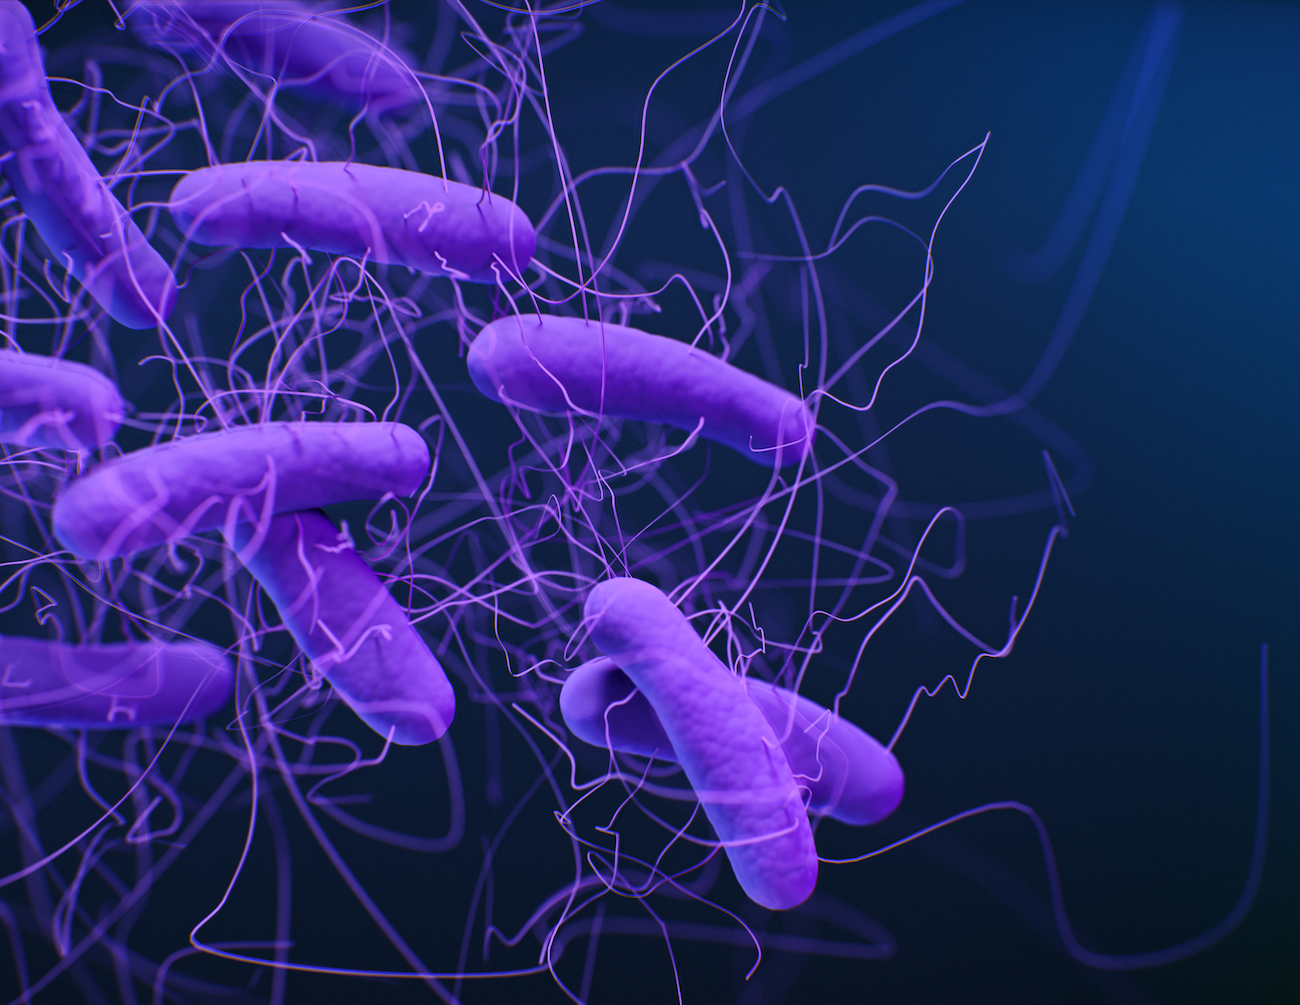 Using Fecal Microbiota Transplant for the Treatment of Recurrent Clostridioides difficile Infection: An Expert Interview with Sahil Khanna, MBBS  